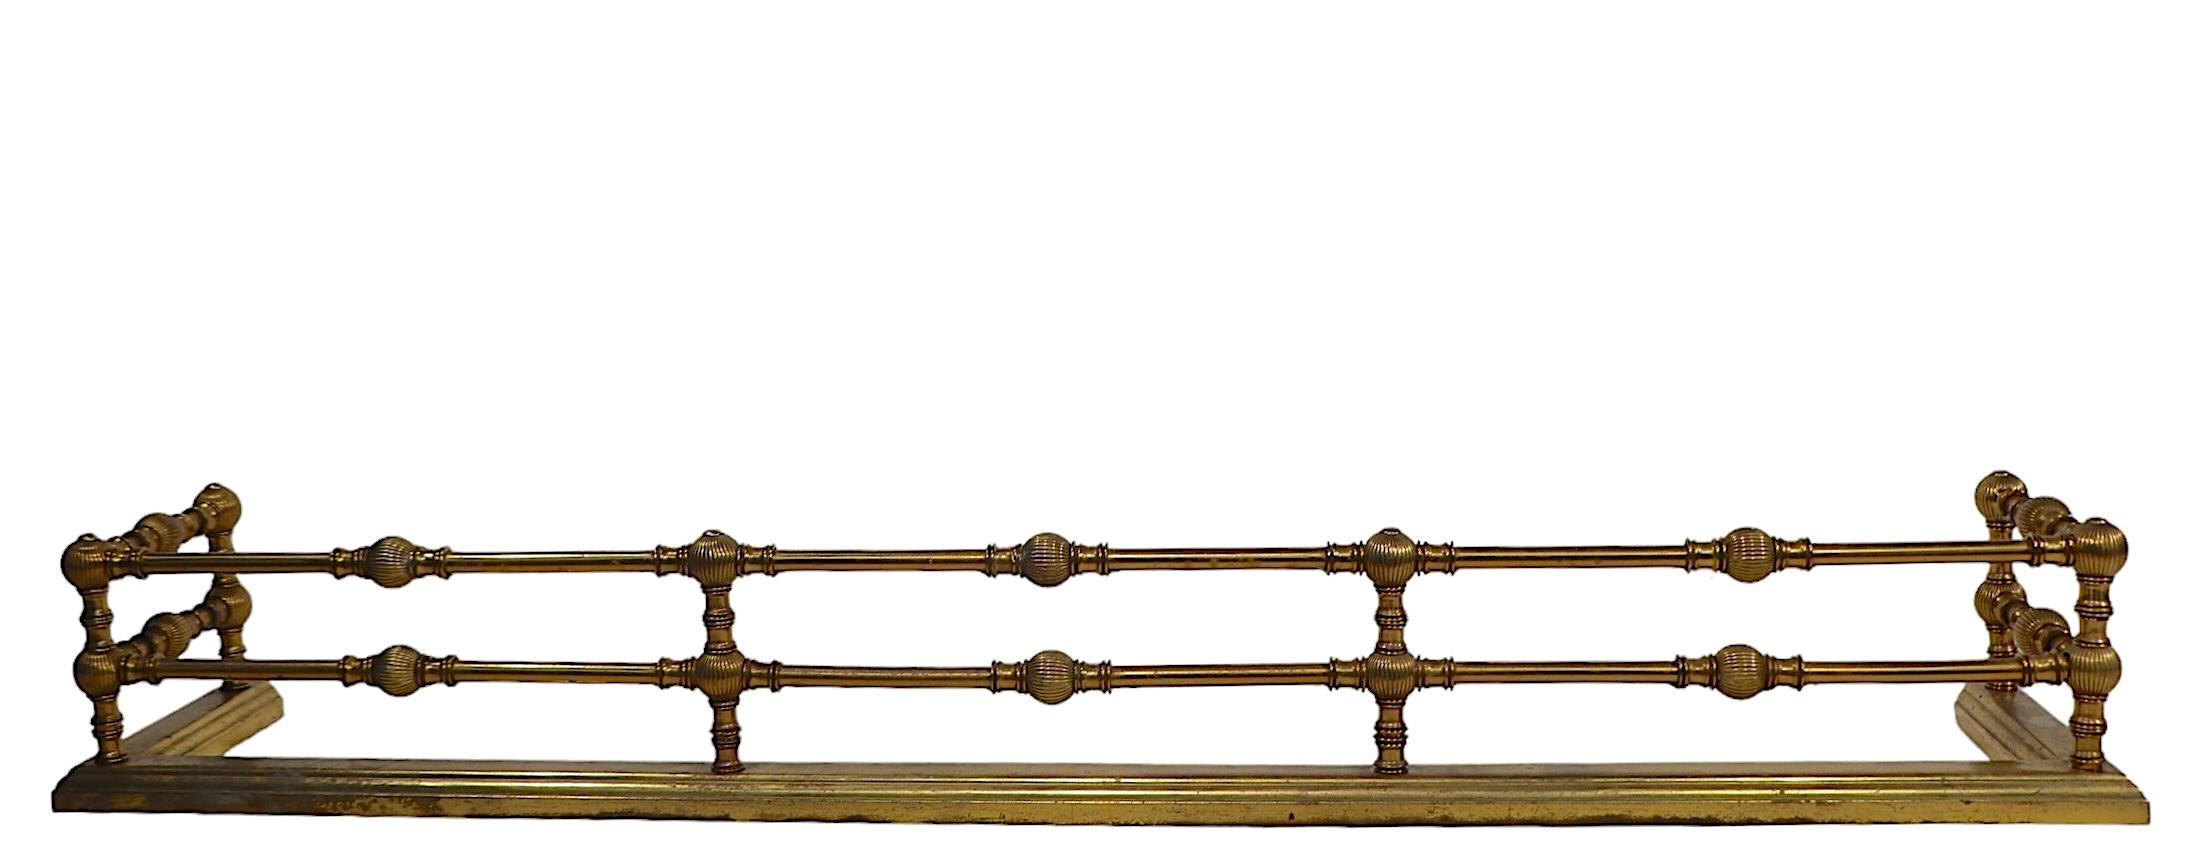 Classical Victorian,  Aesthetic Movement brass fireplace fender. The fender features two repeating brass rails, with decorative fluted ball spaces.  late 19th century vintage, this example was probably made in the USA, in the English manner, it is